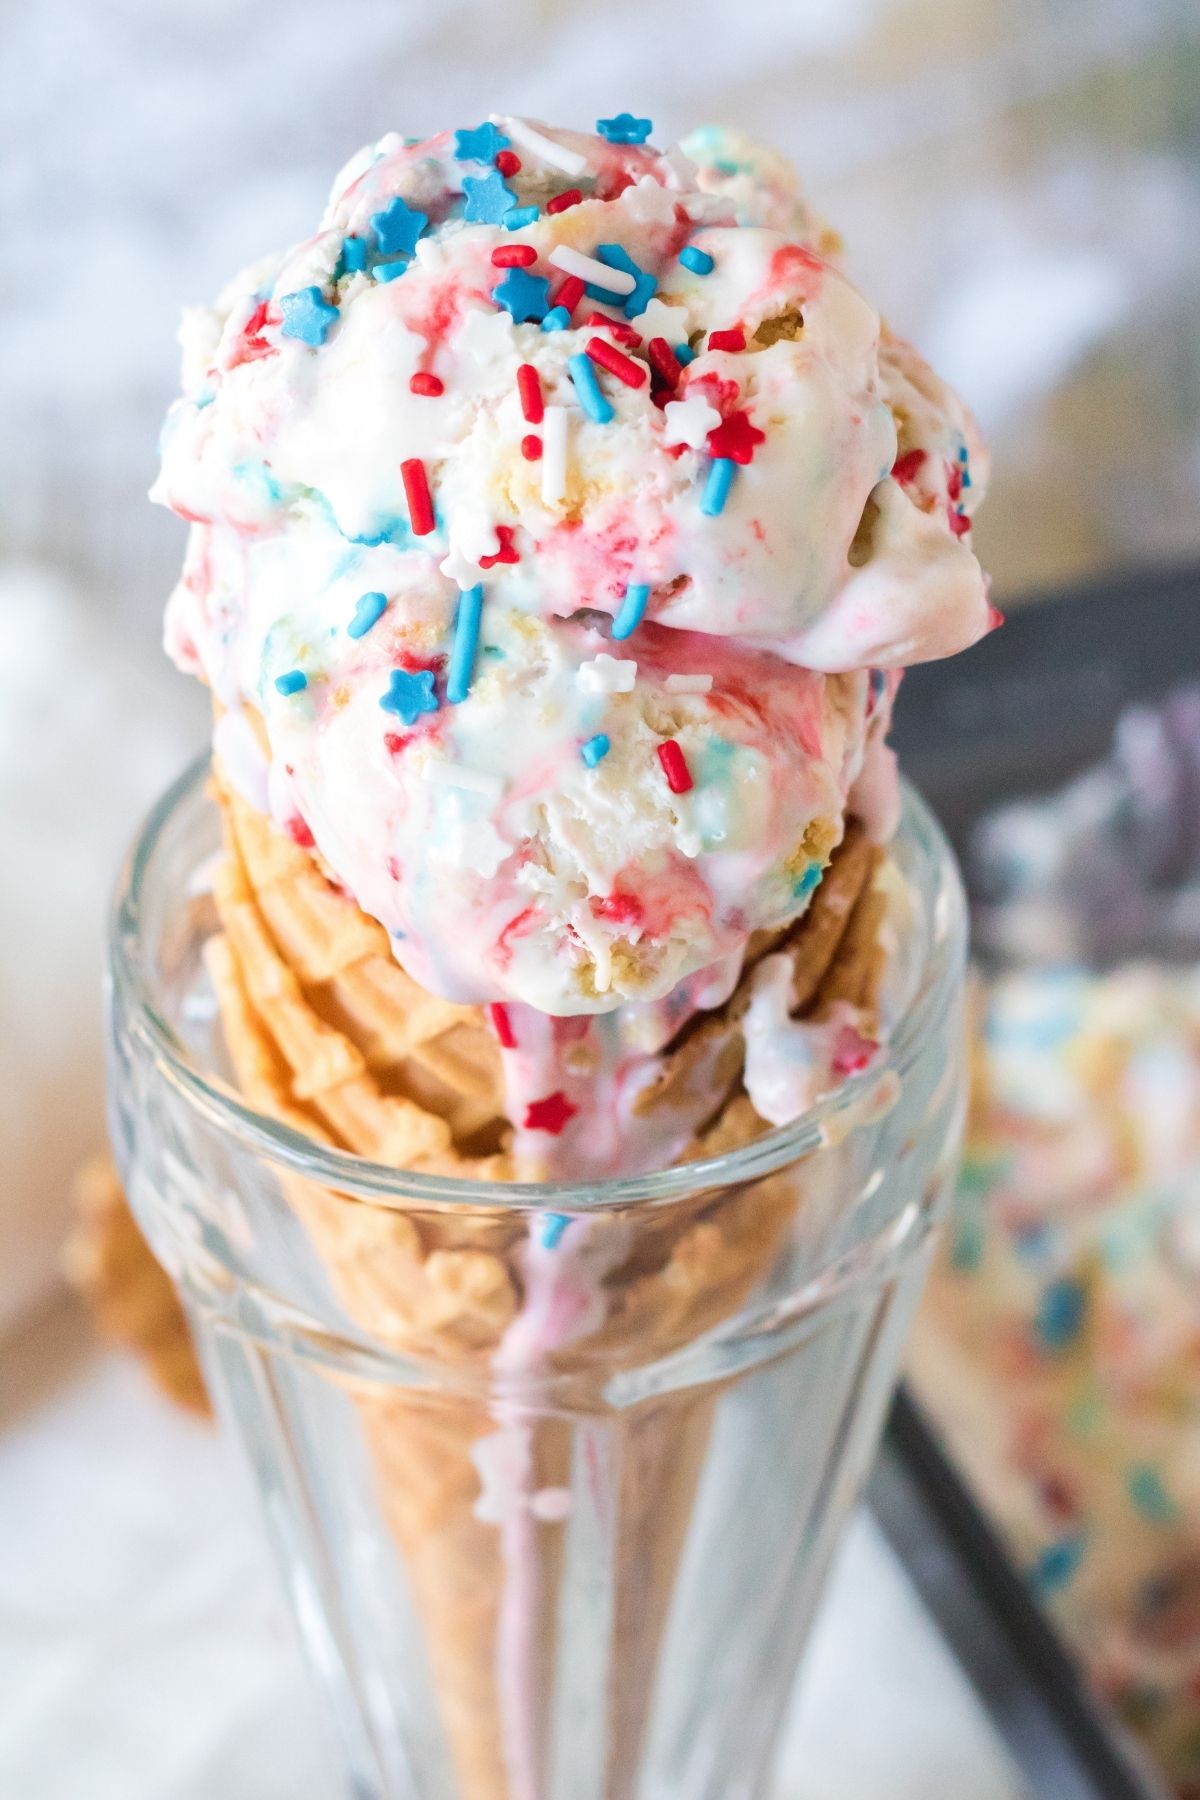 ice cream cone with a couple of scoops of red, white, and blue ice cream standing up in a clear glass